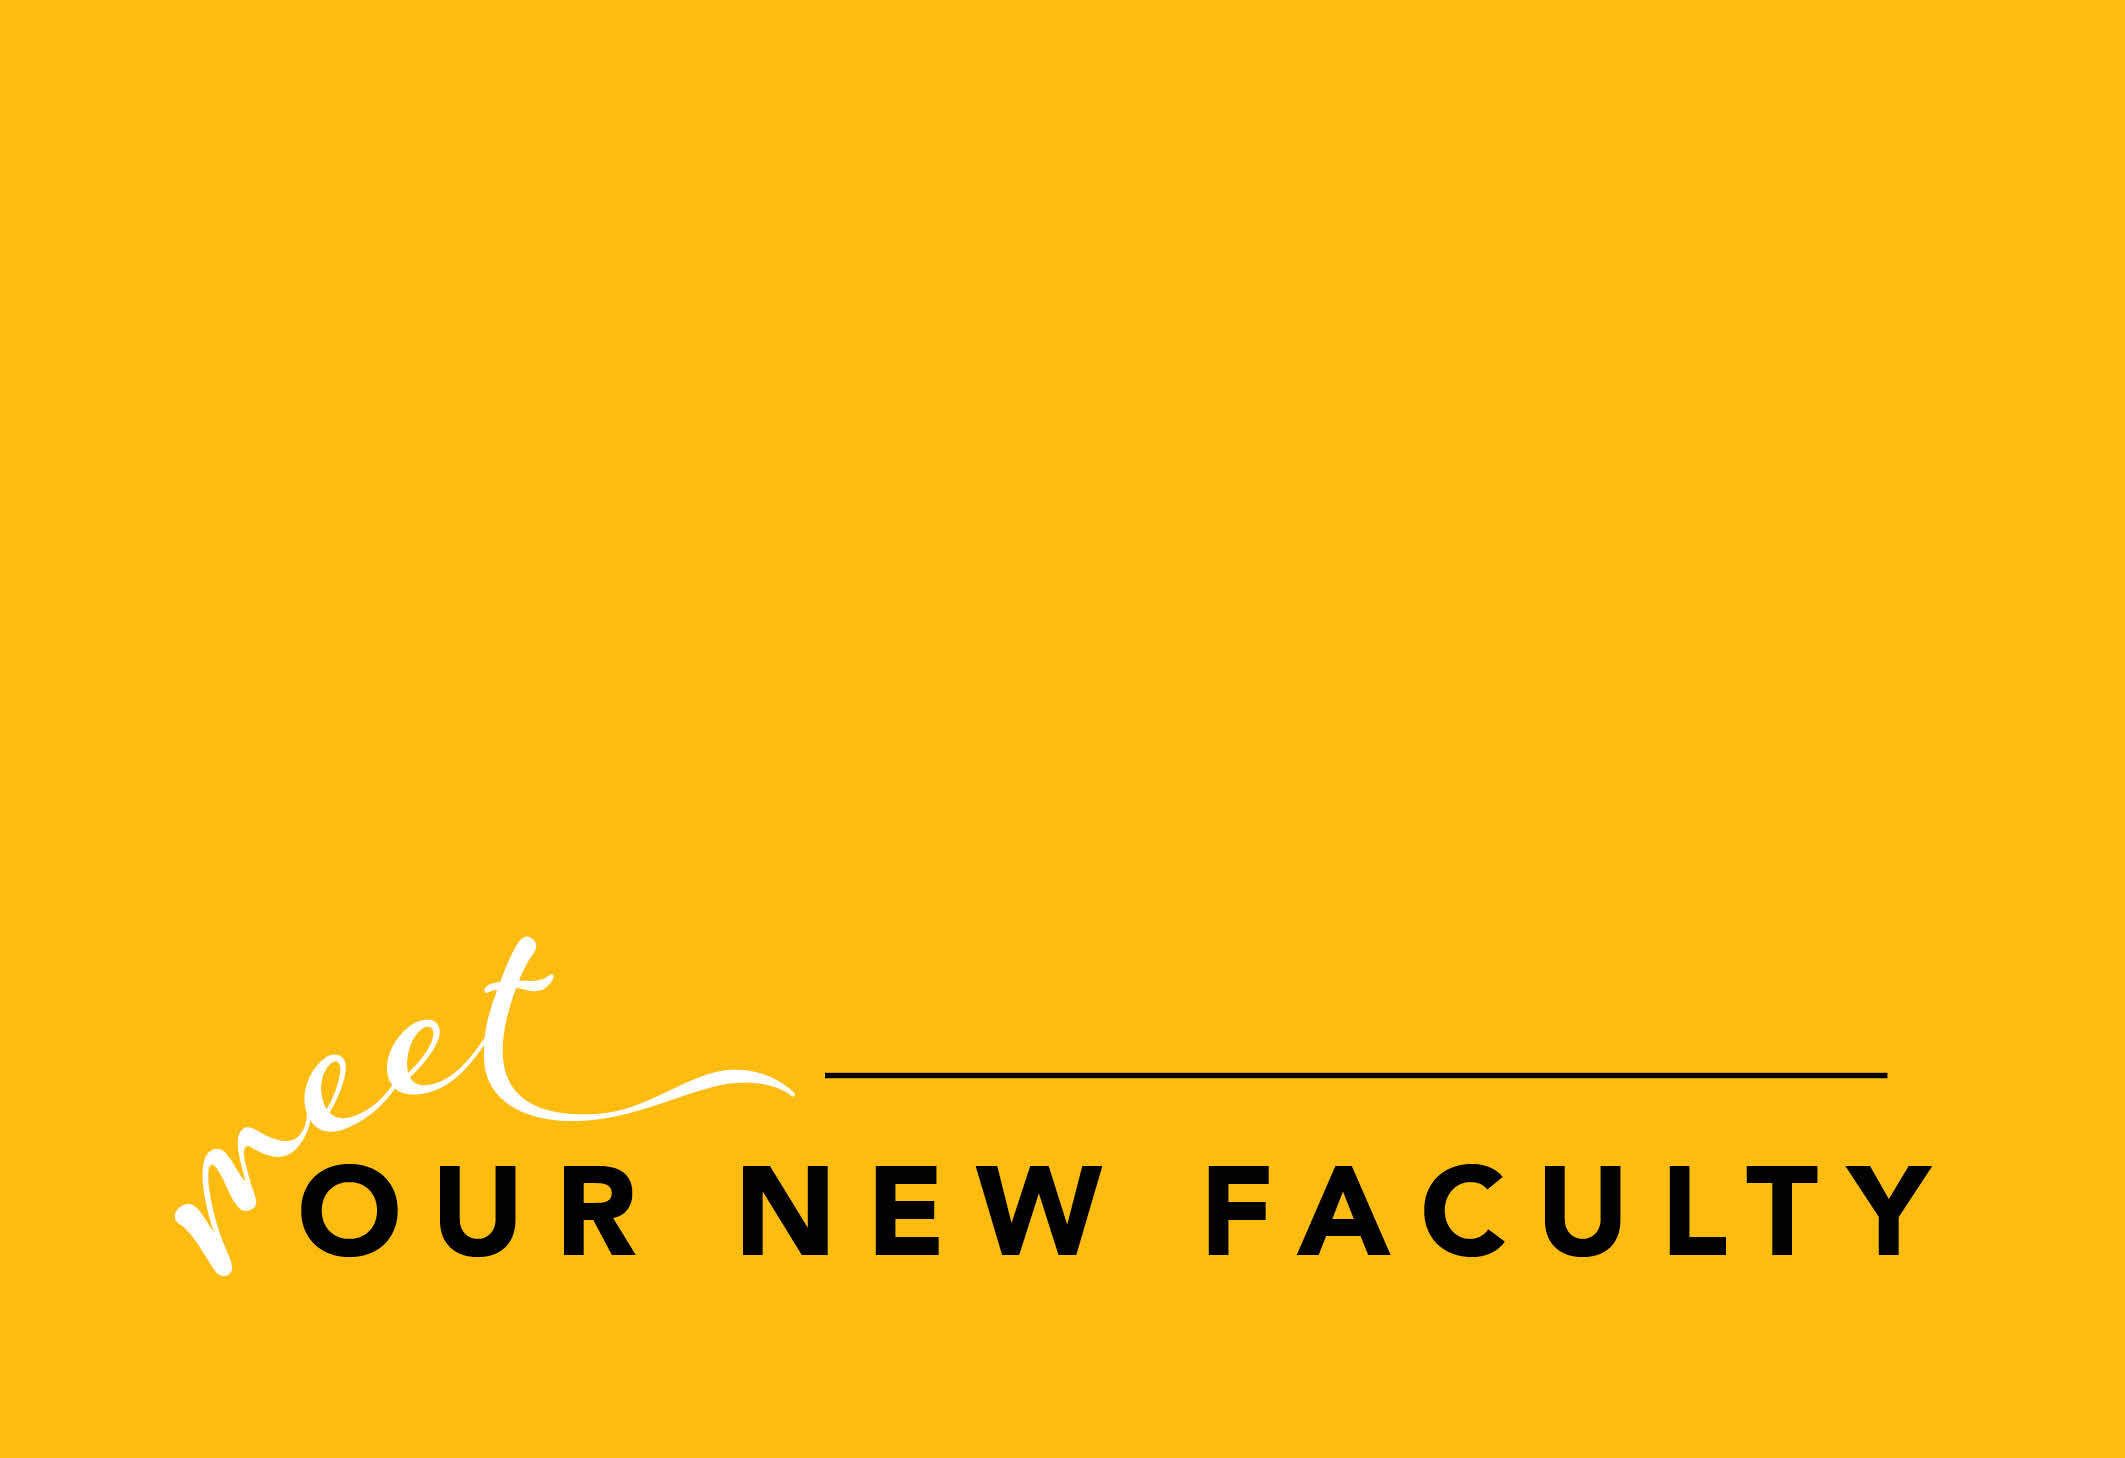 Meet our new faculty